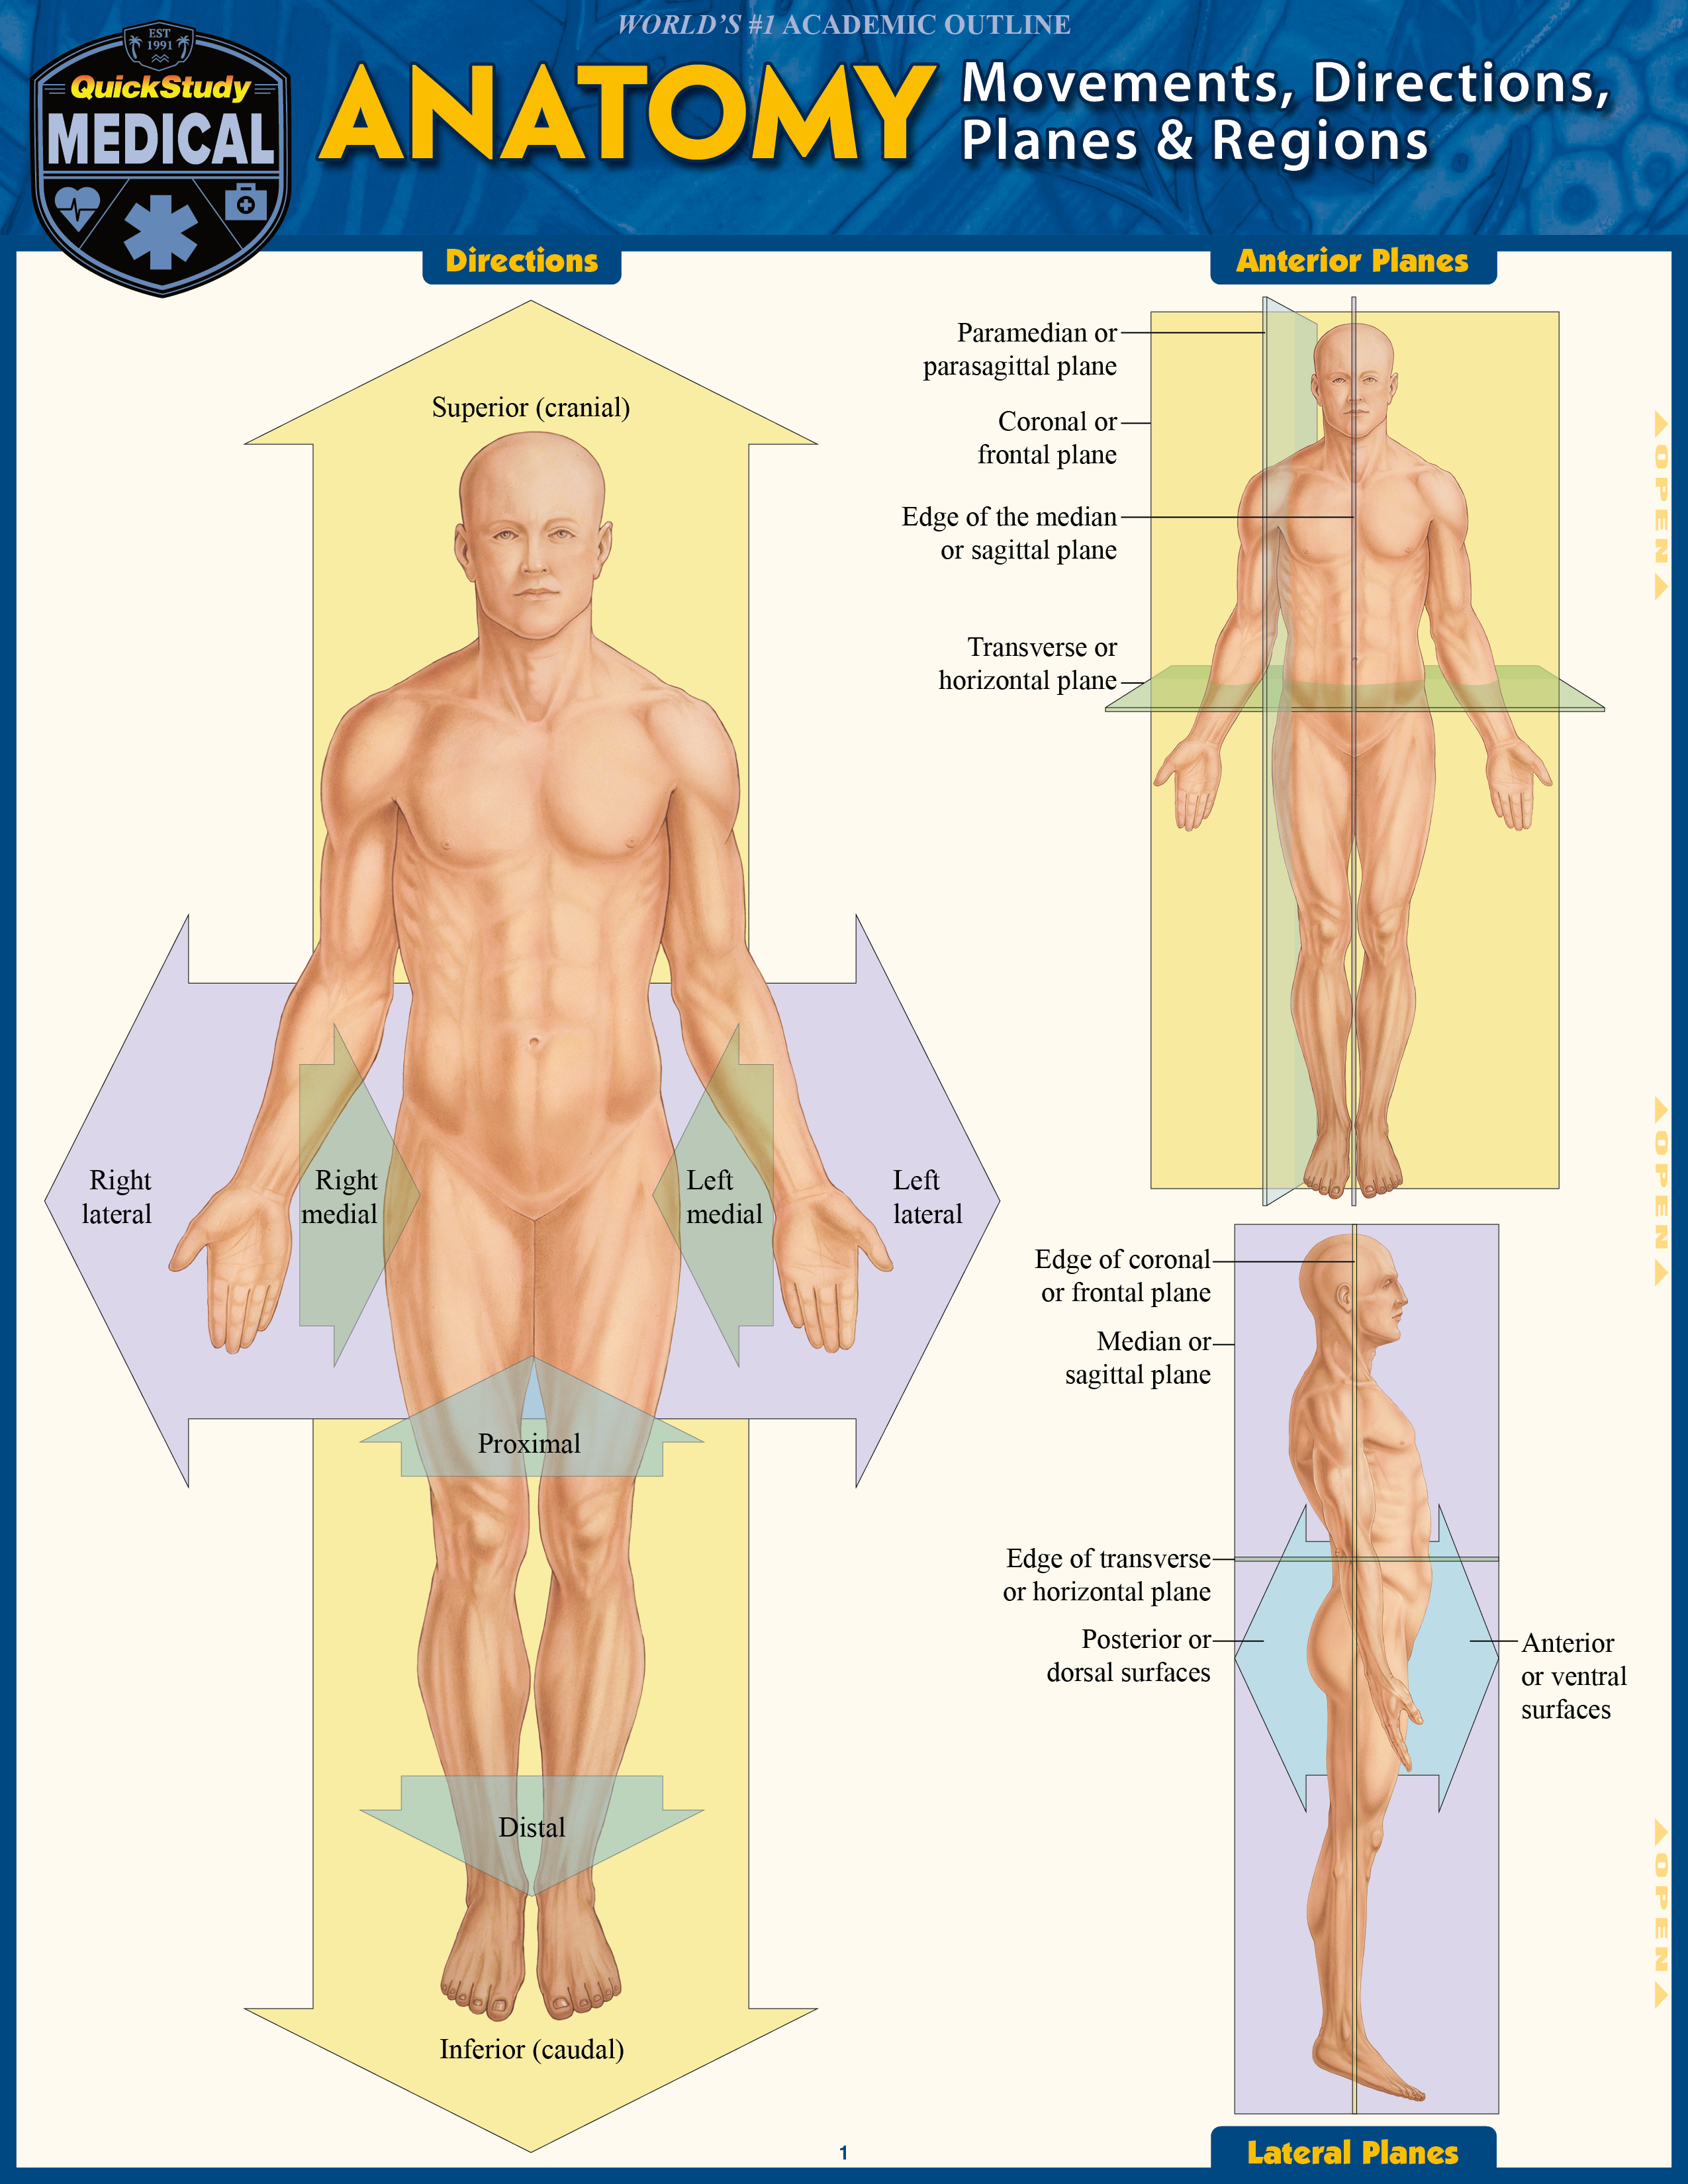 QuickStudy | Anatomy: Directions, Planes, Movements & Regions Laminated Study Guide